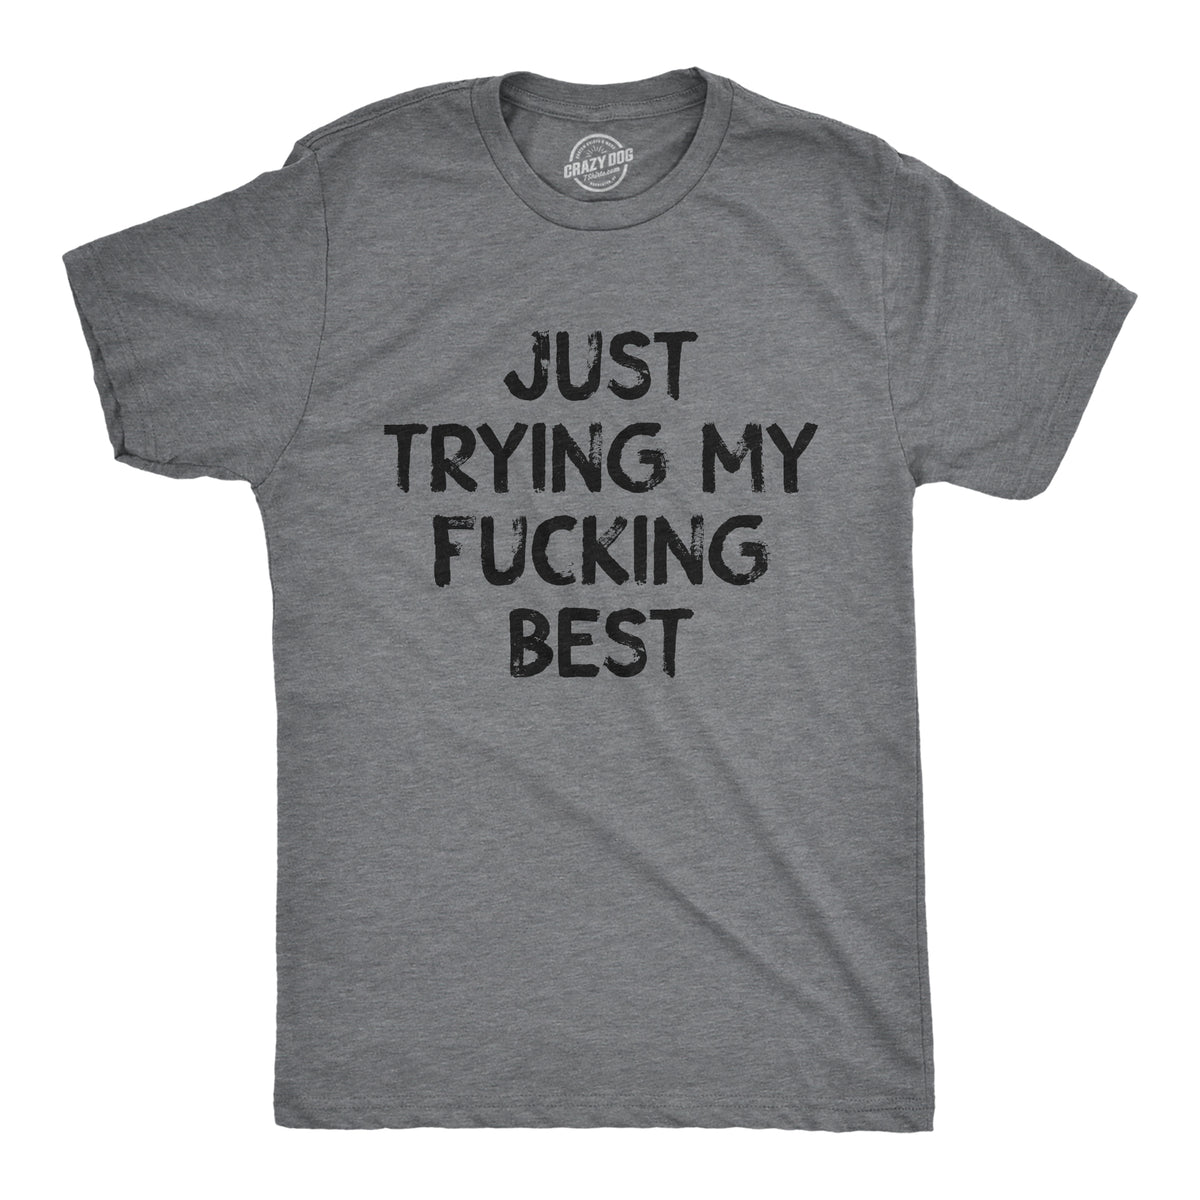 Funny Dark Heather Grey - BEST Just Trying My Fucking Best Mens T Shirt Nerdy sarcastic Tee